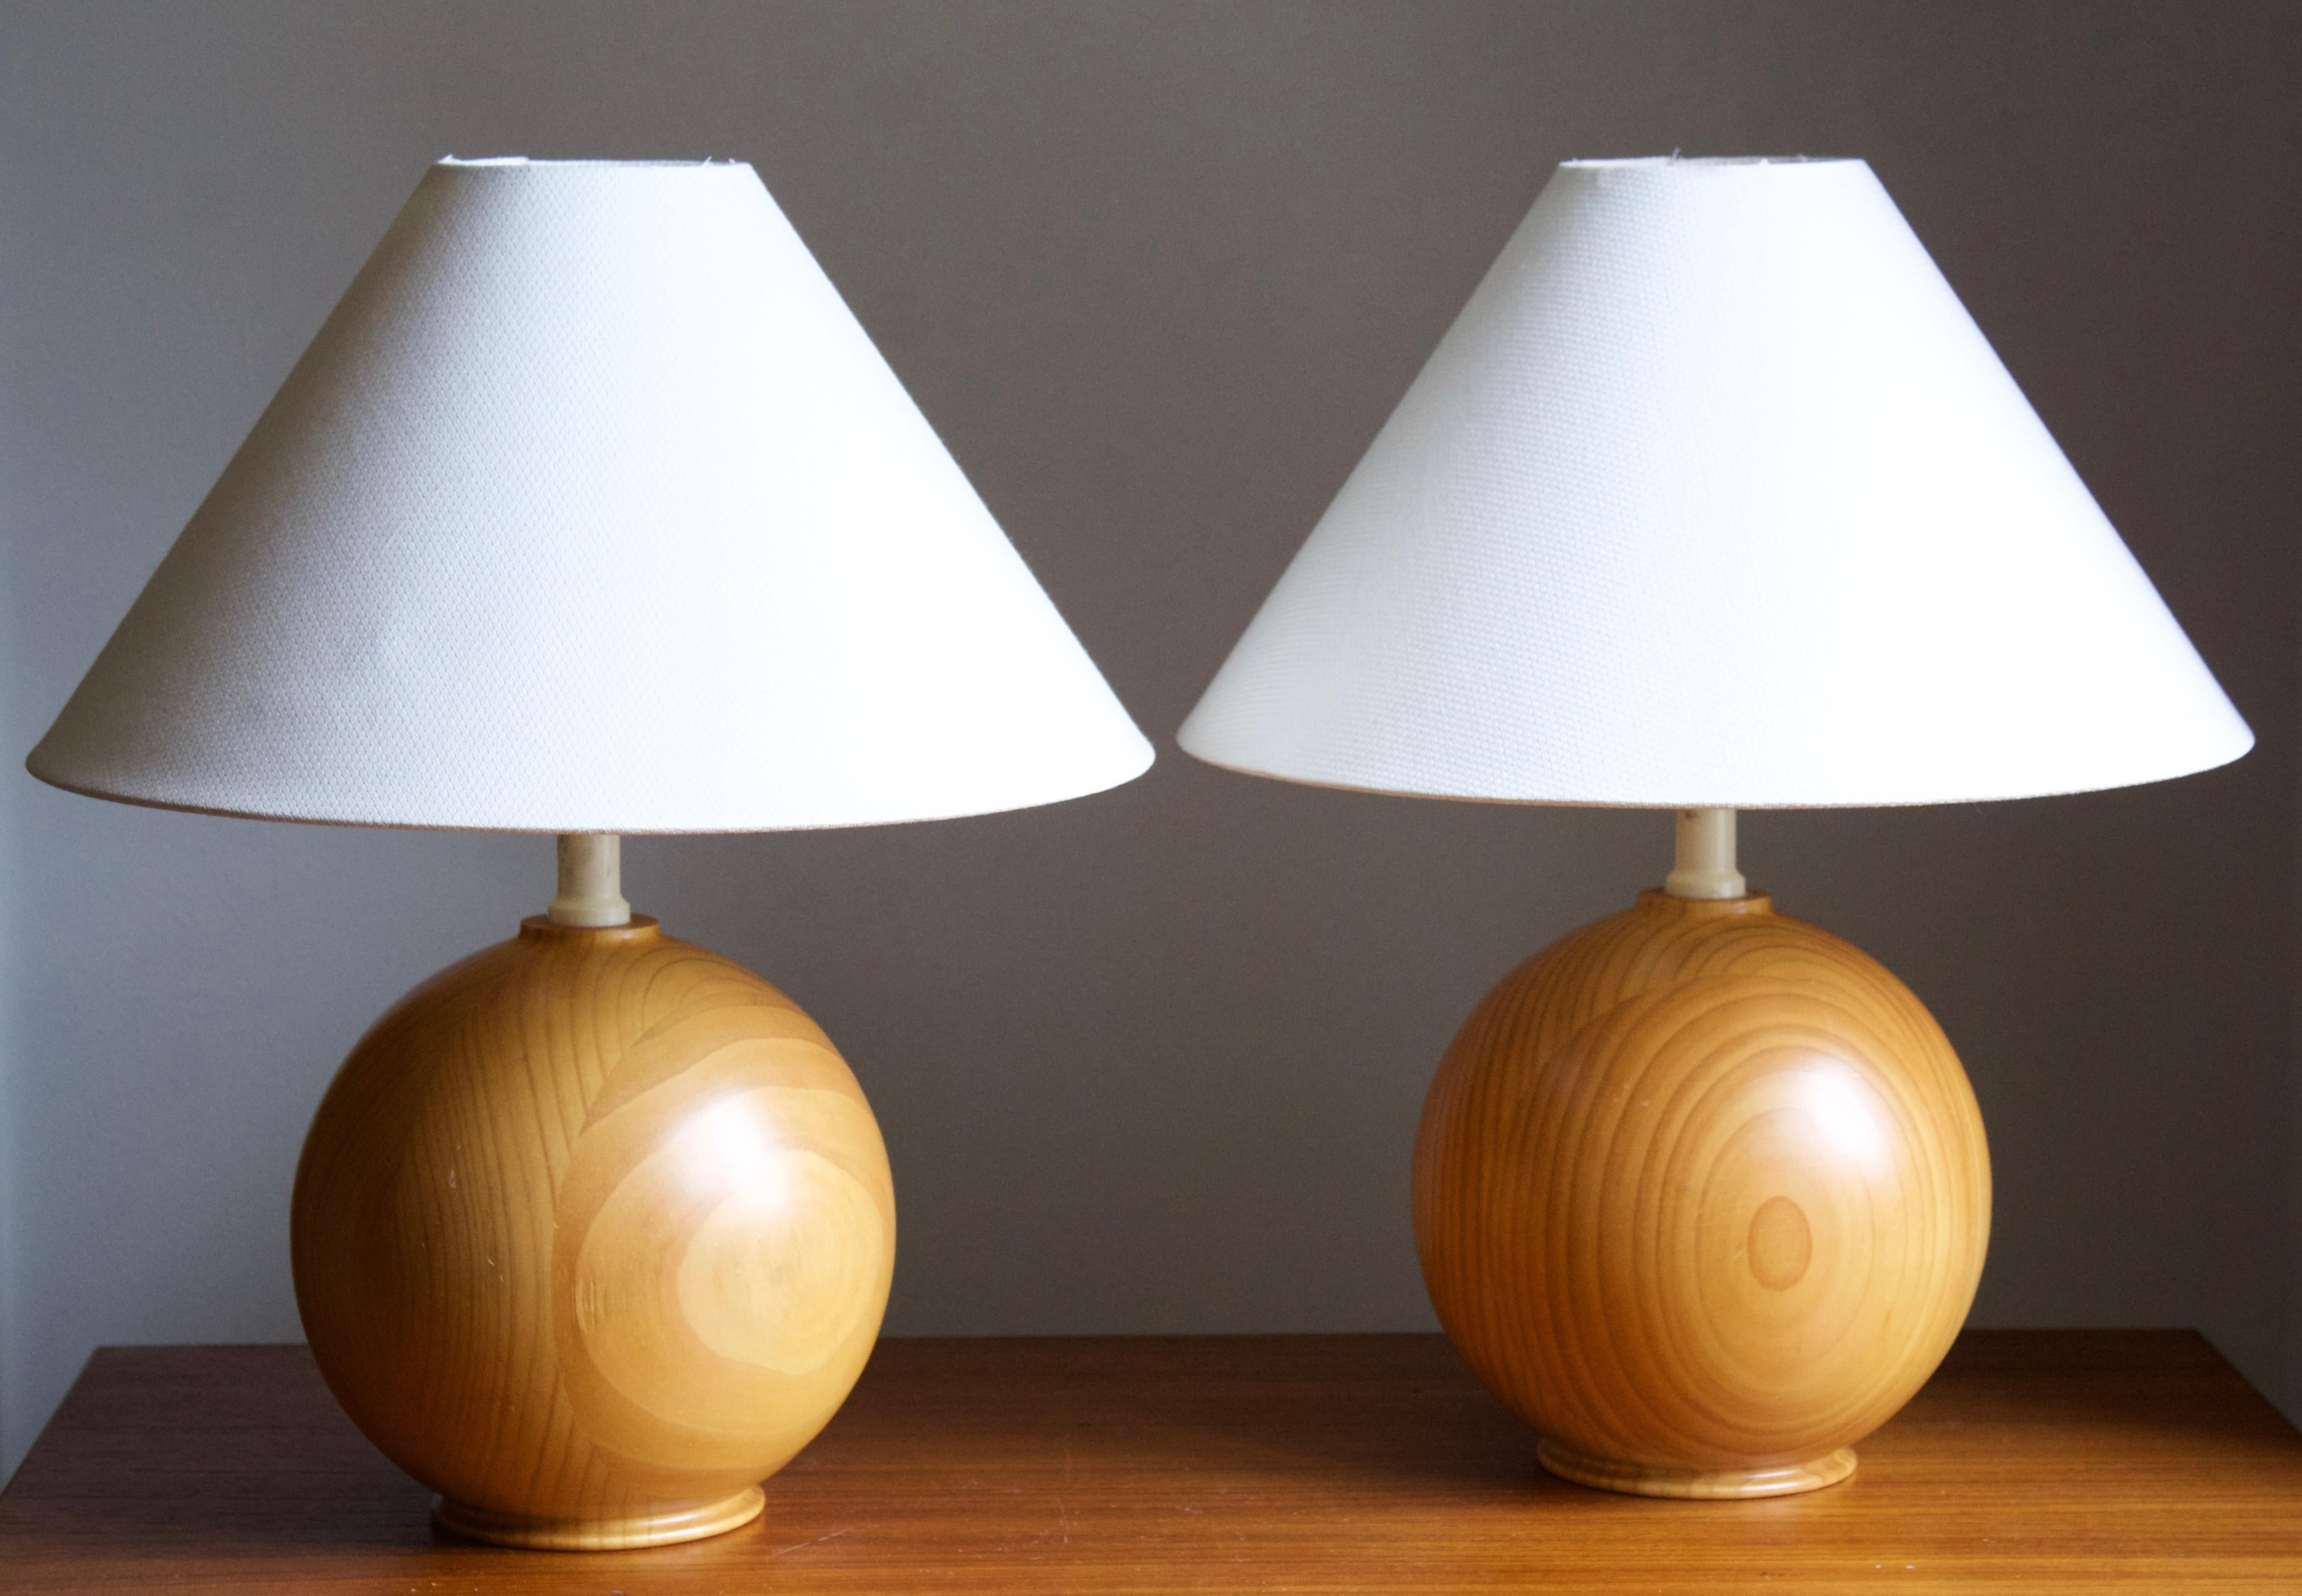 A pair of table lamps. Bases in solid pine. 

Stated dimensions exclude lampshade, height includes socket. Sold without lampshades.